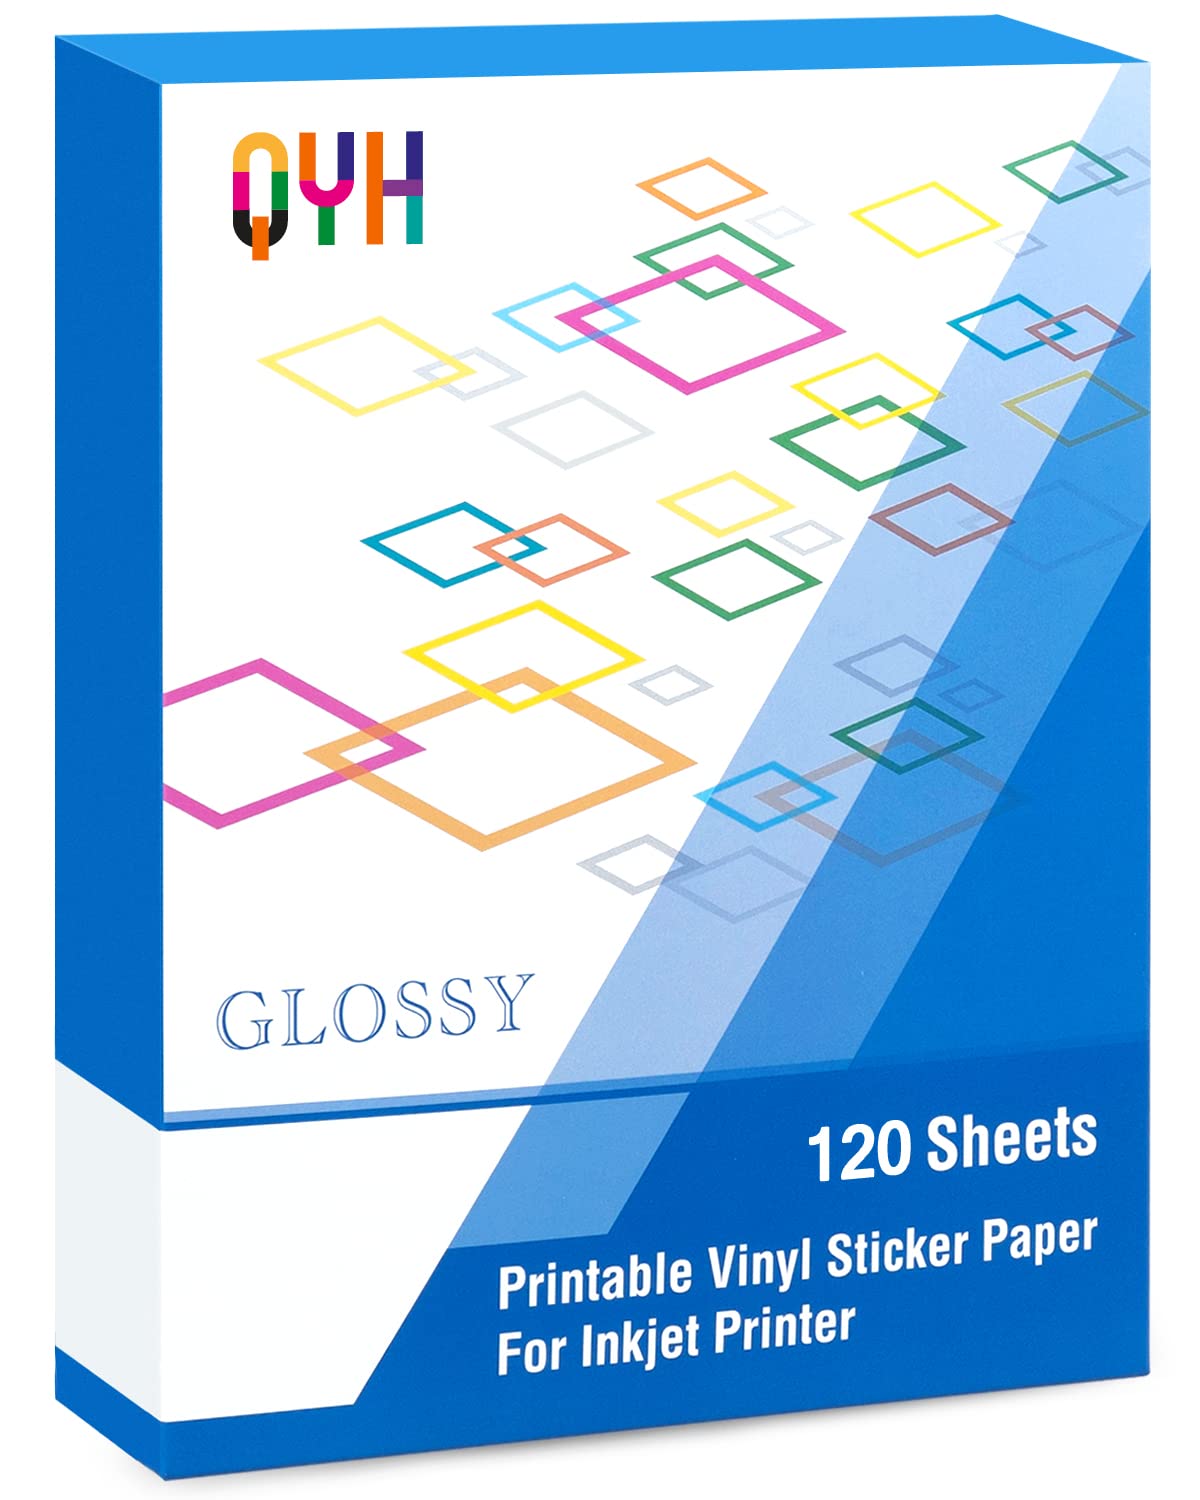 QYH Printable Vinyl Sticker Paper for Inkjet Printer Glossy 120 Sheets Adhseive White Labels 85x11 Decal Paper